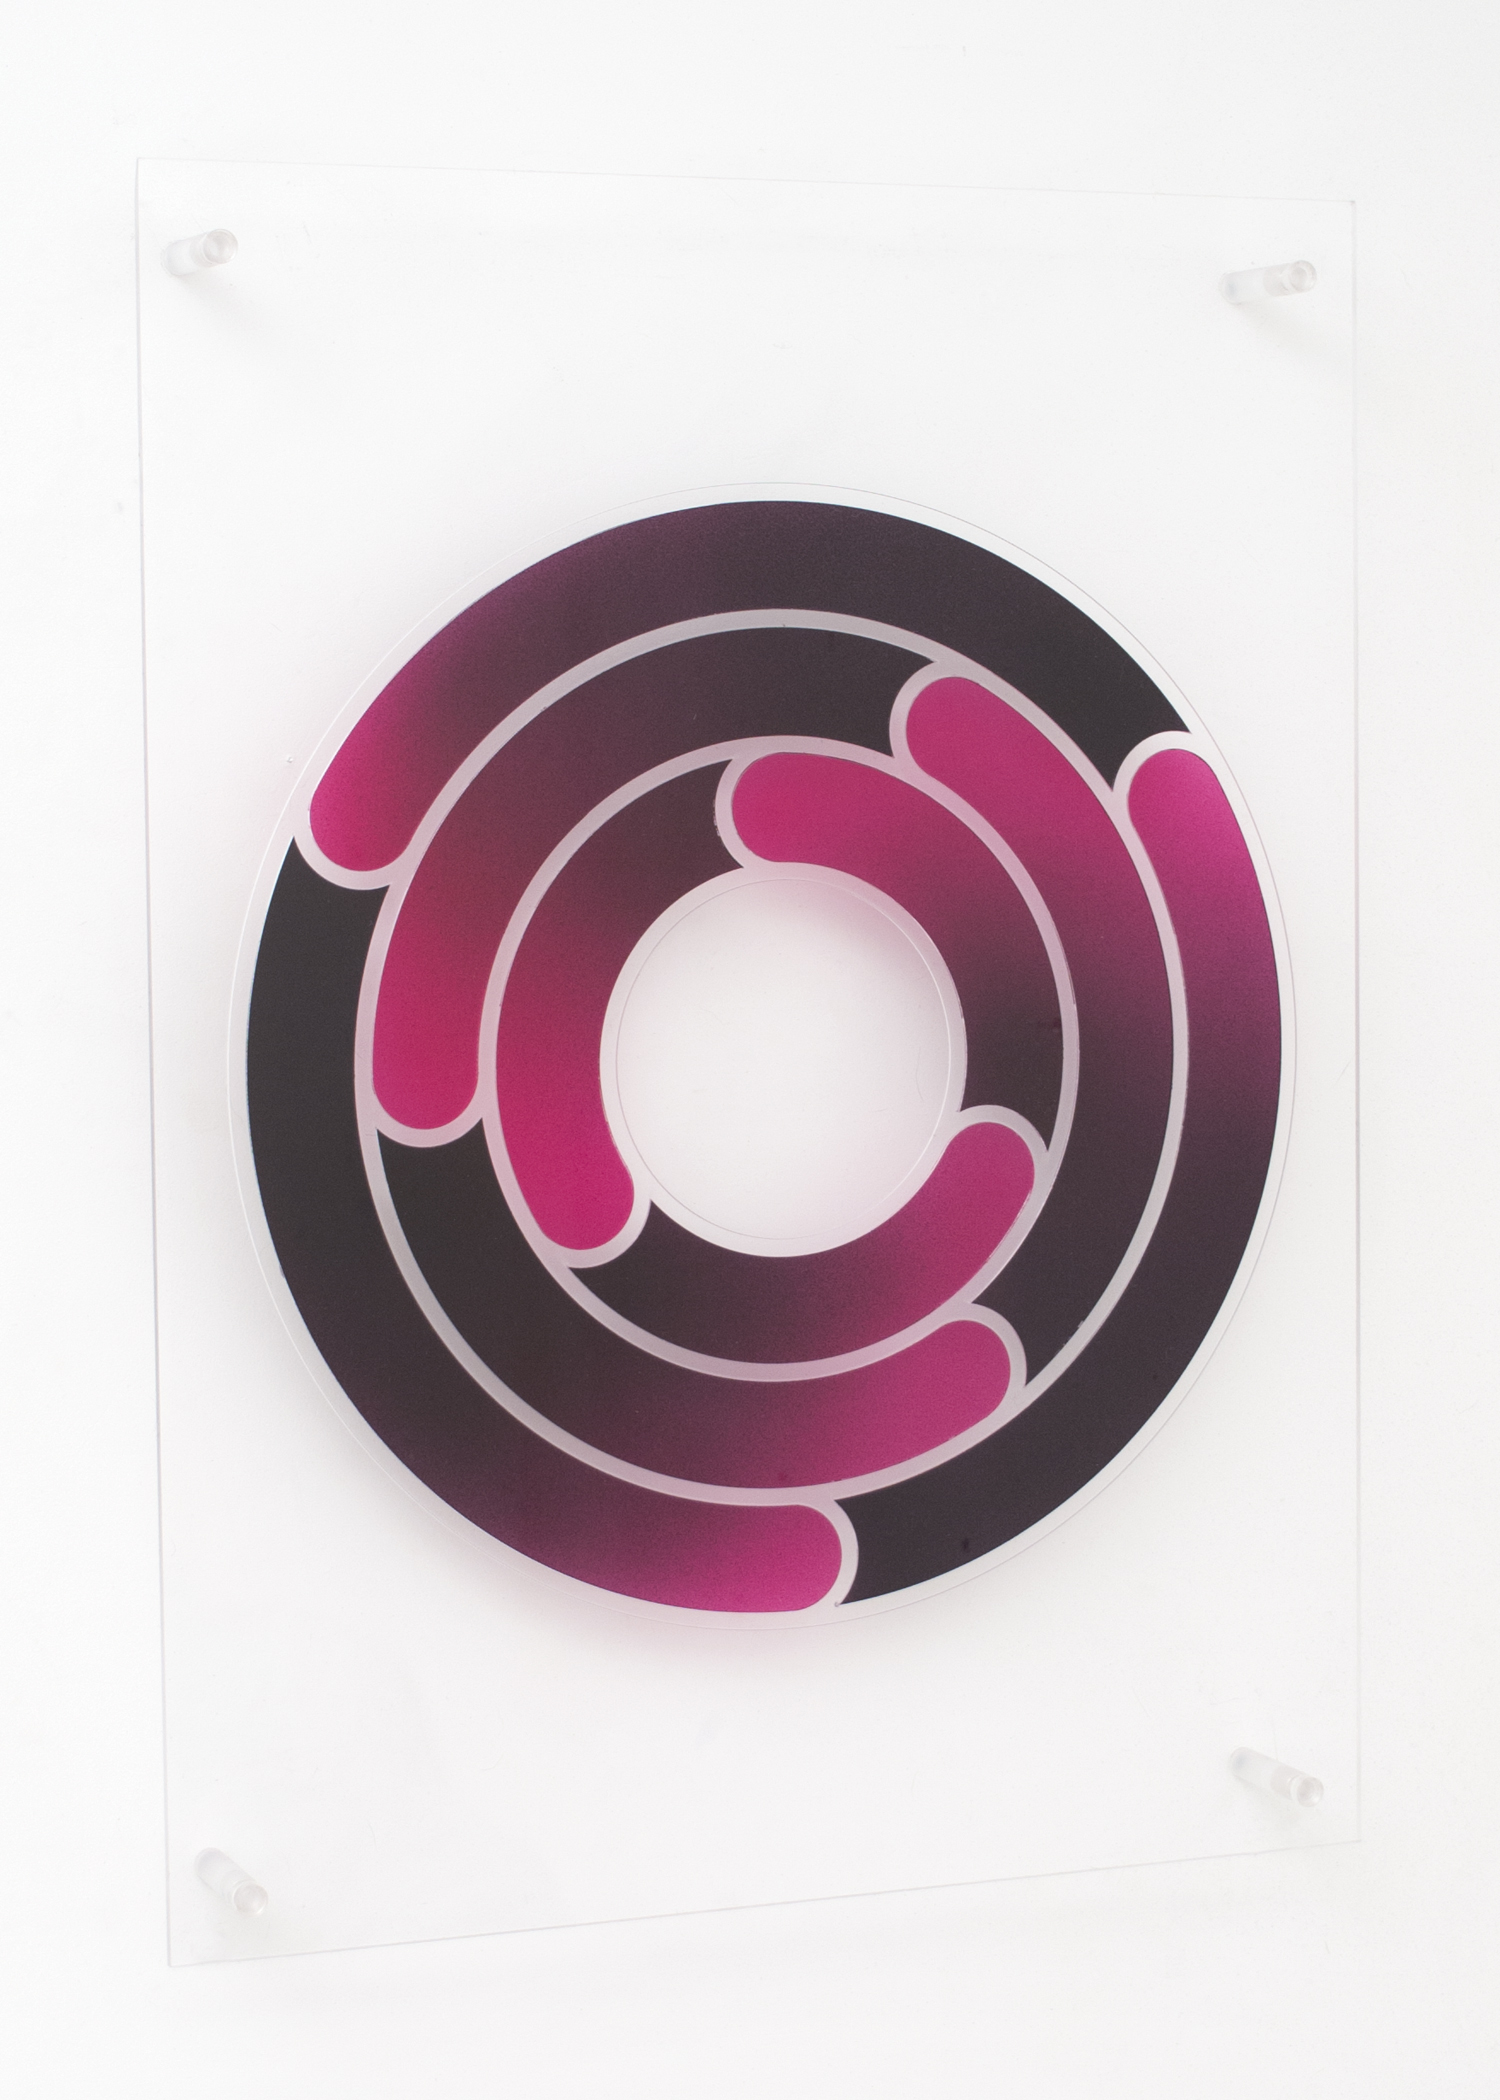 (untitled - nine overlapping annular sectors or three circles)